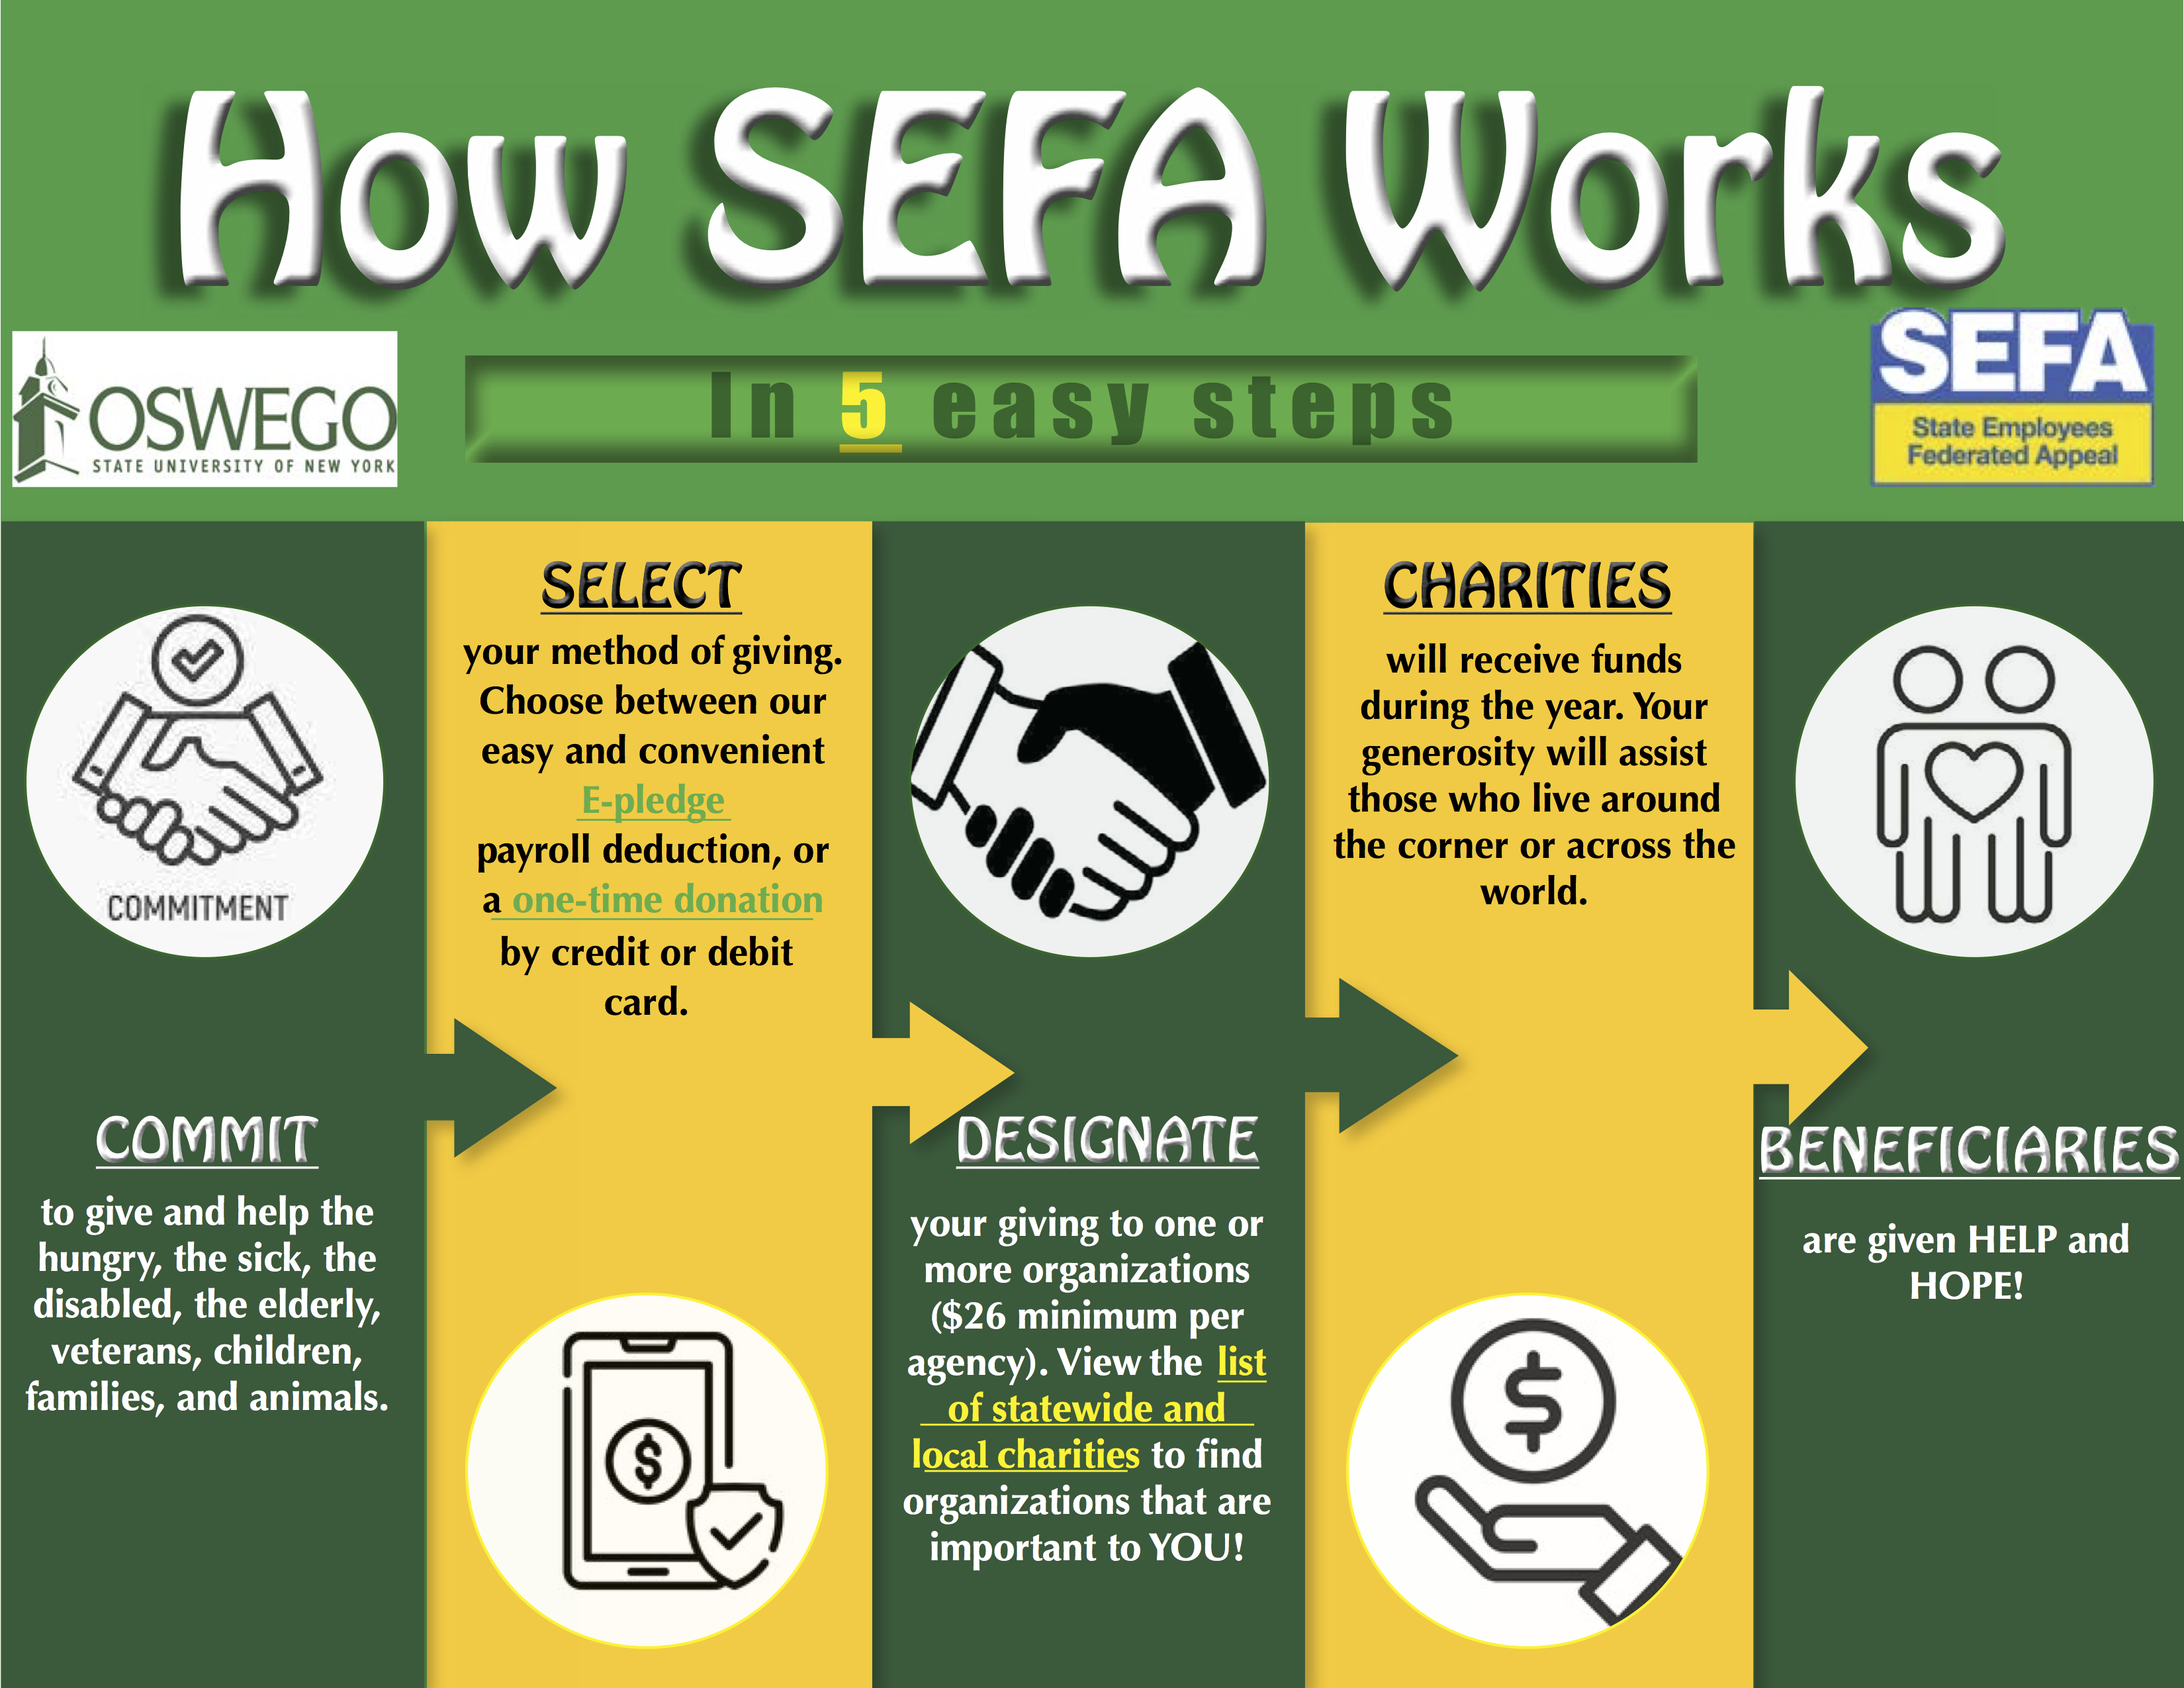 How SEFA works in 5 easy steps. Information presented is found on this page under "Three ways to give" and "Making a biweekly pledge."